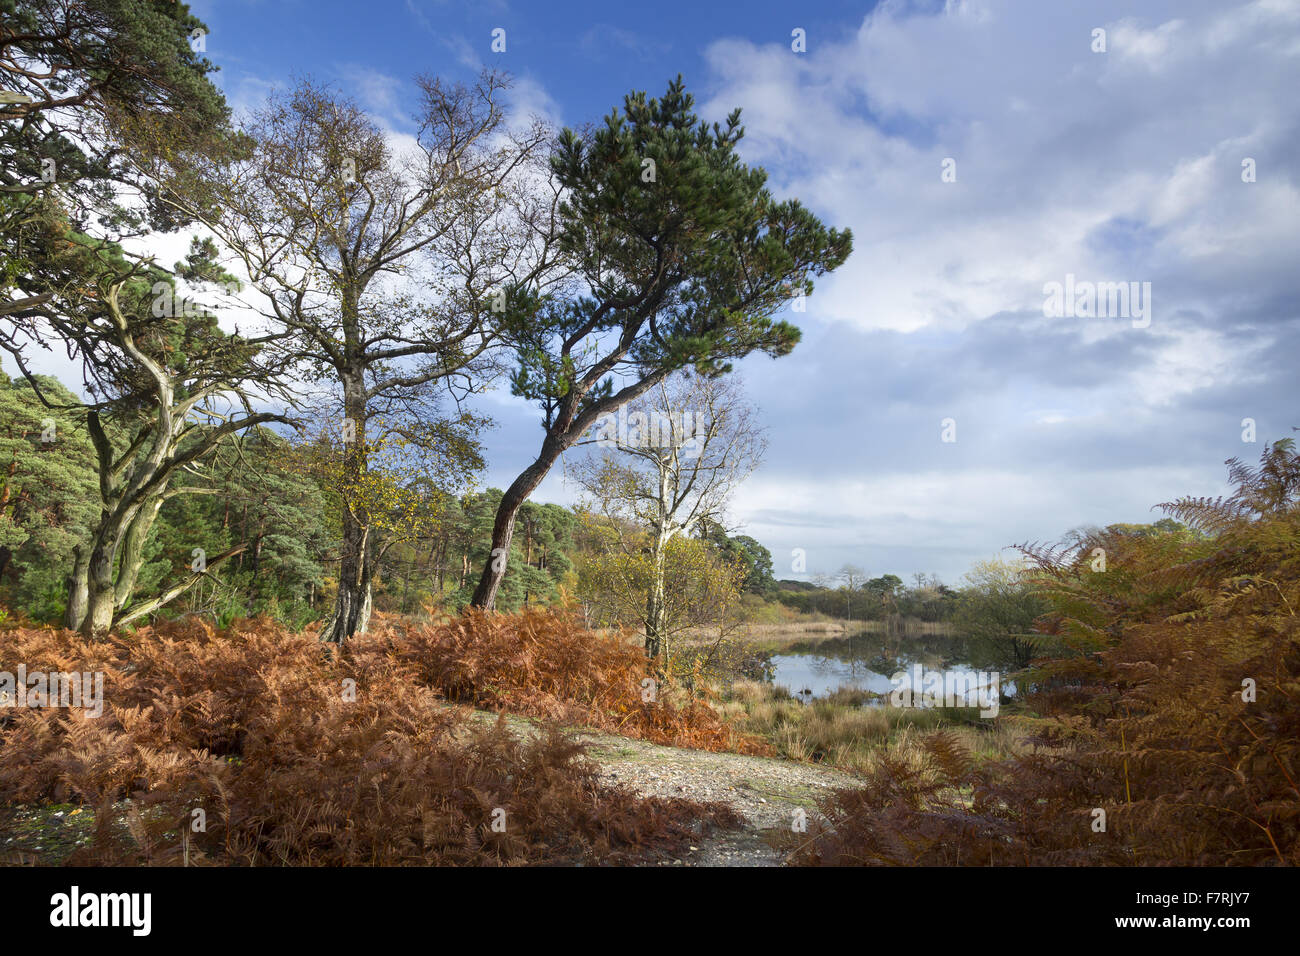 Brownsea Island, Dorset. This island wildlife sanctuary is a haven for wildlife such as red squirrels and a huge variety of birds. Stock Photo